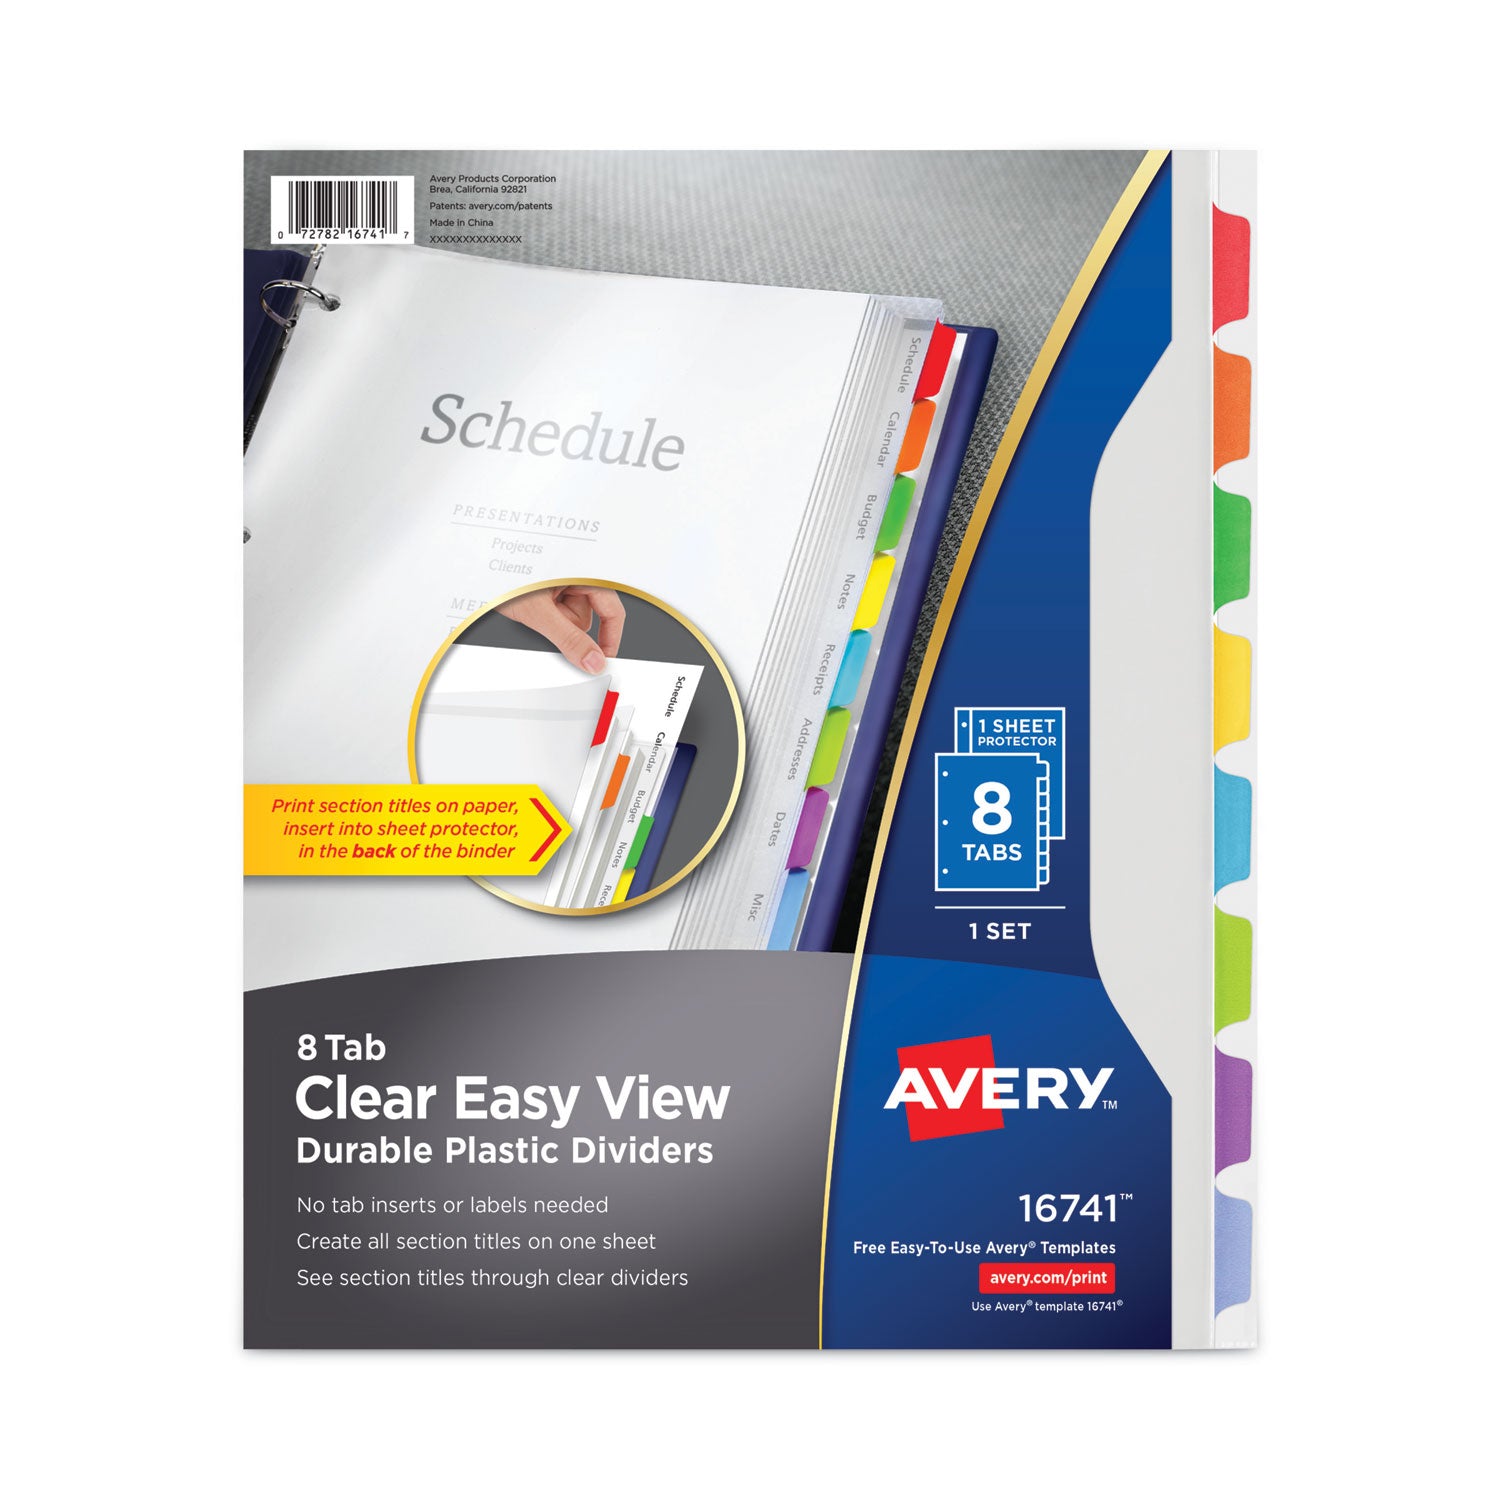 Clear Easy View Plastic Dividers with Multicolored Tabs and Sheet Protector, 8-Tab, 11 x 8.5, Clear, 1 Set - 